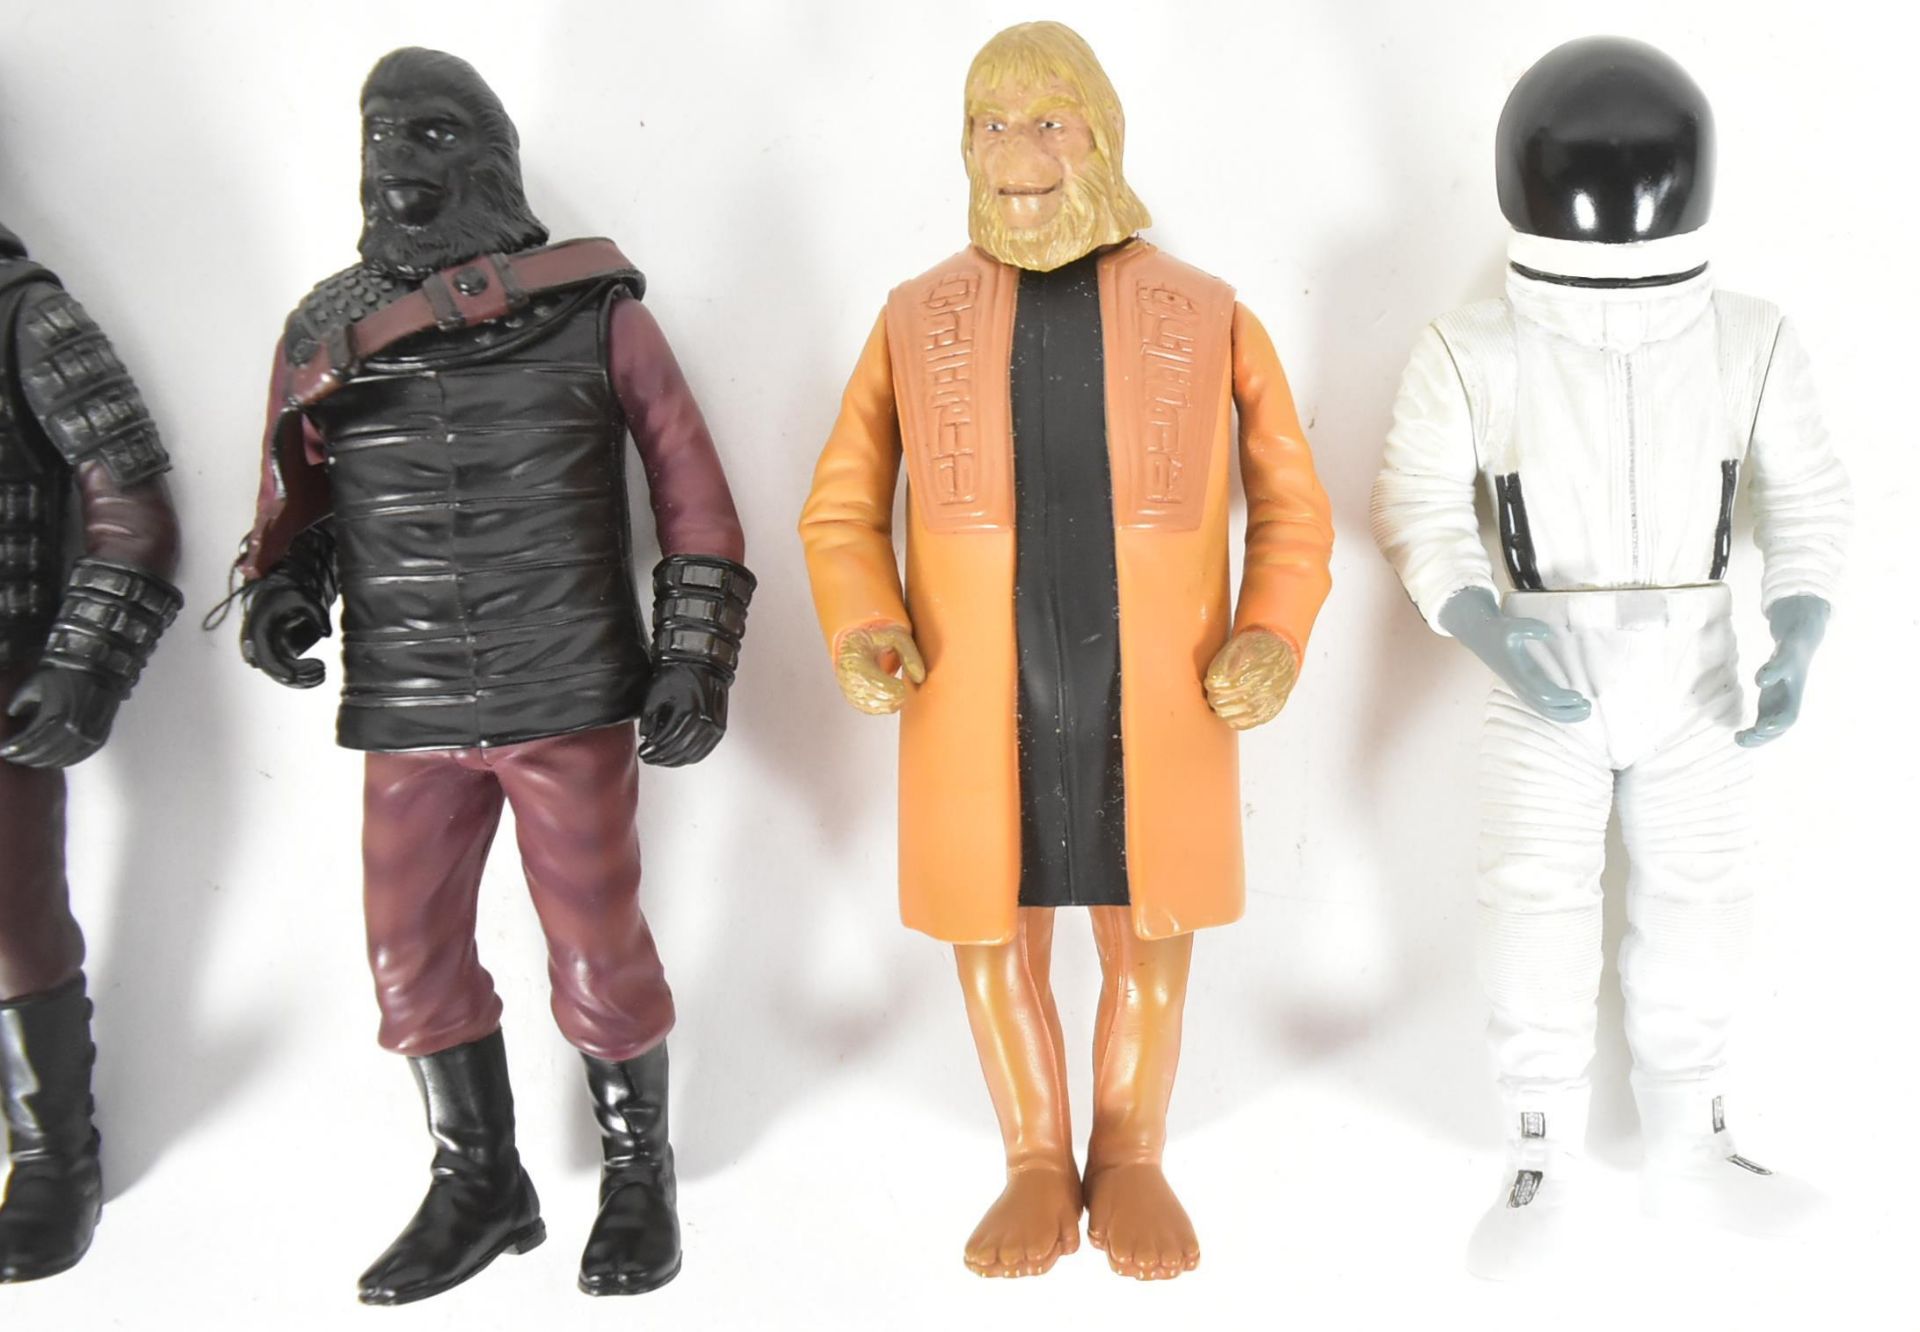 PLANET OF THE APES - MEDICOM - COLLECTION OF ACTION FIGURES - Image 3 of 4